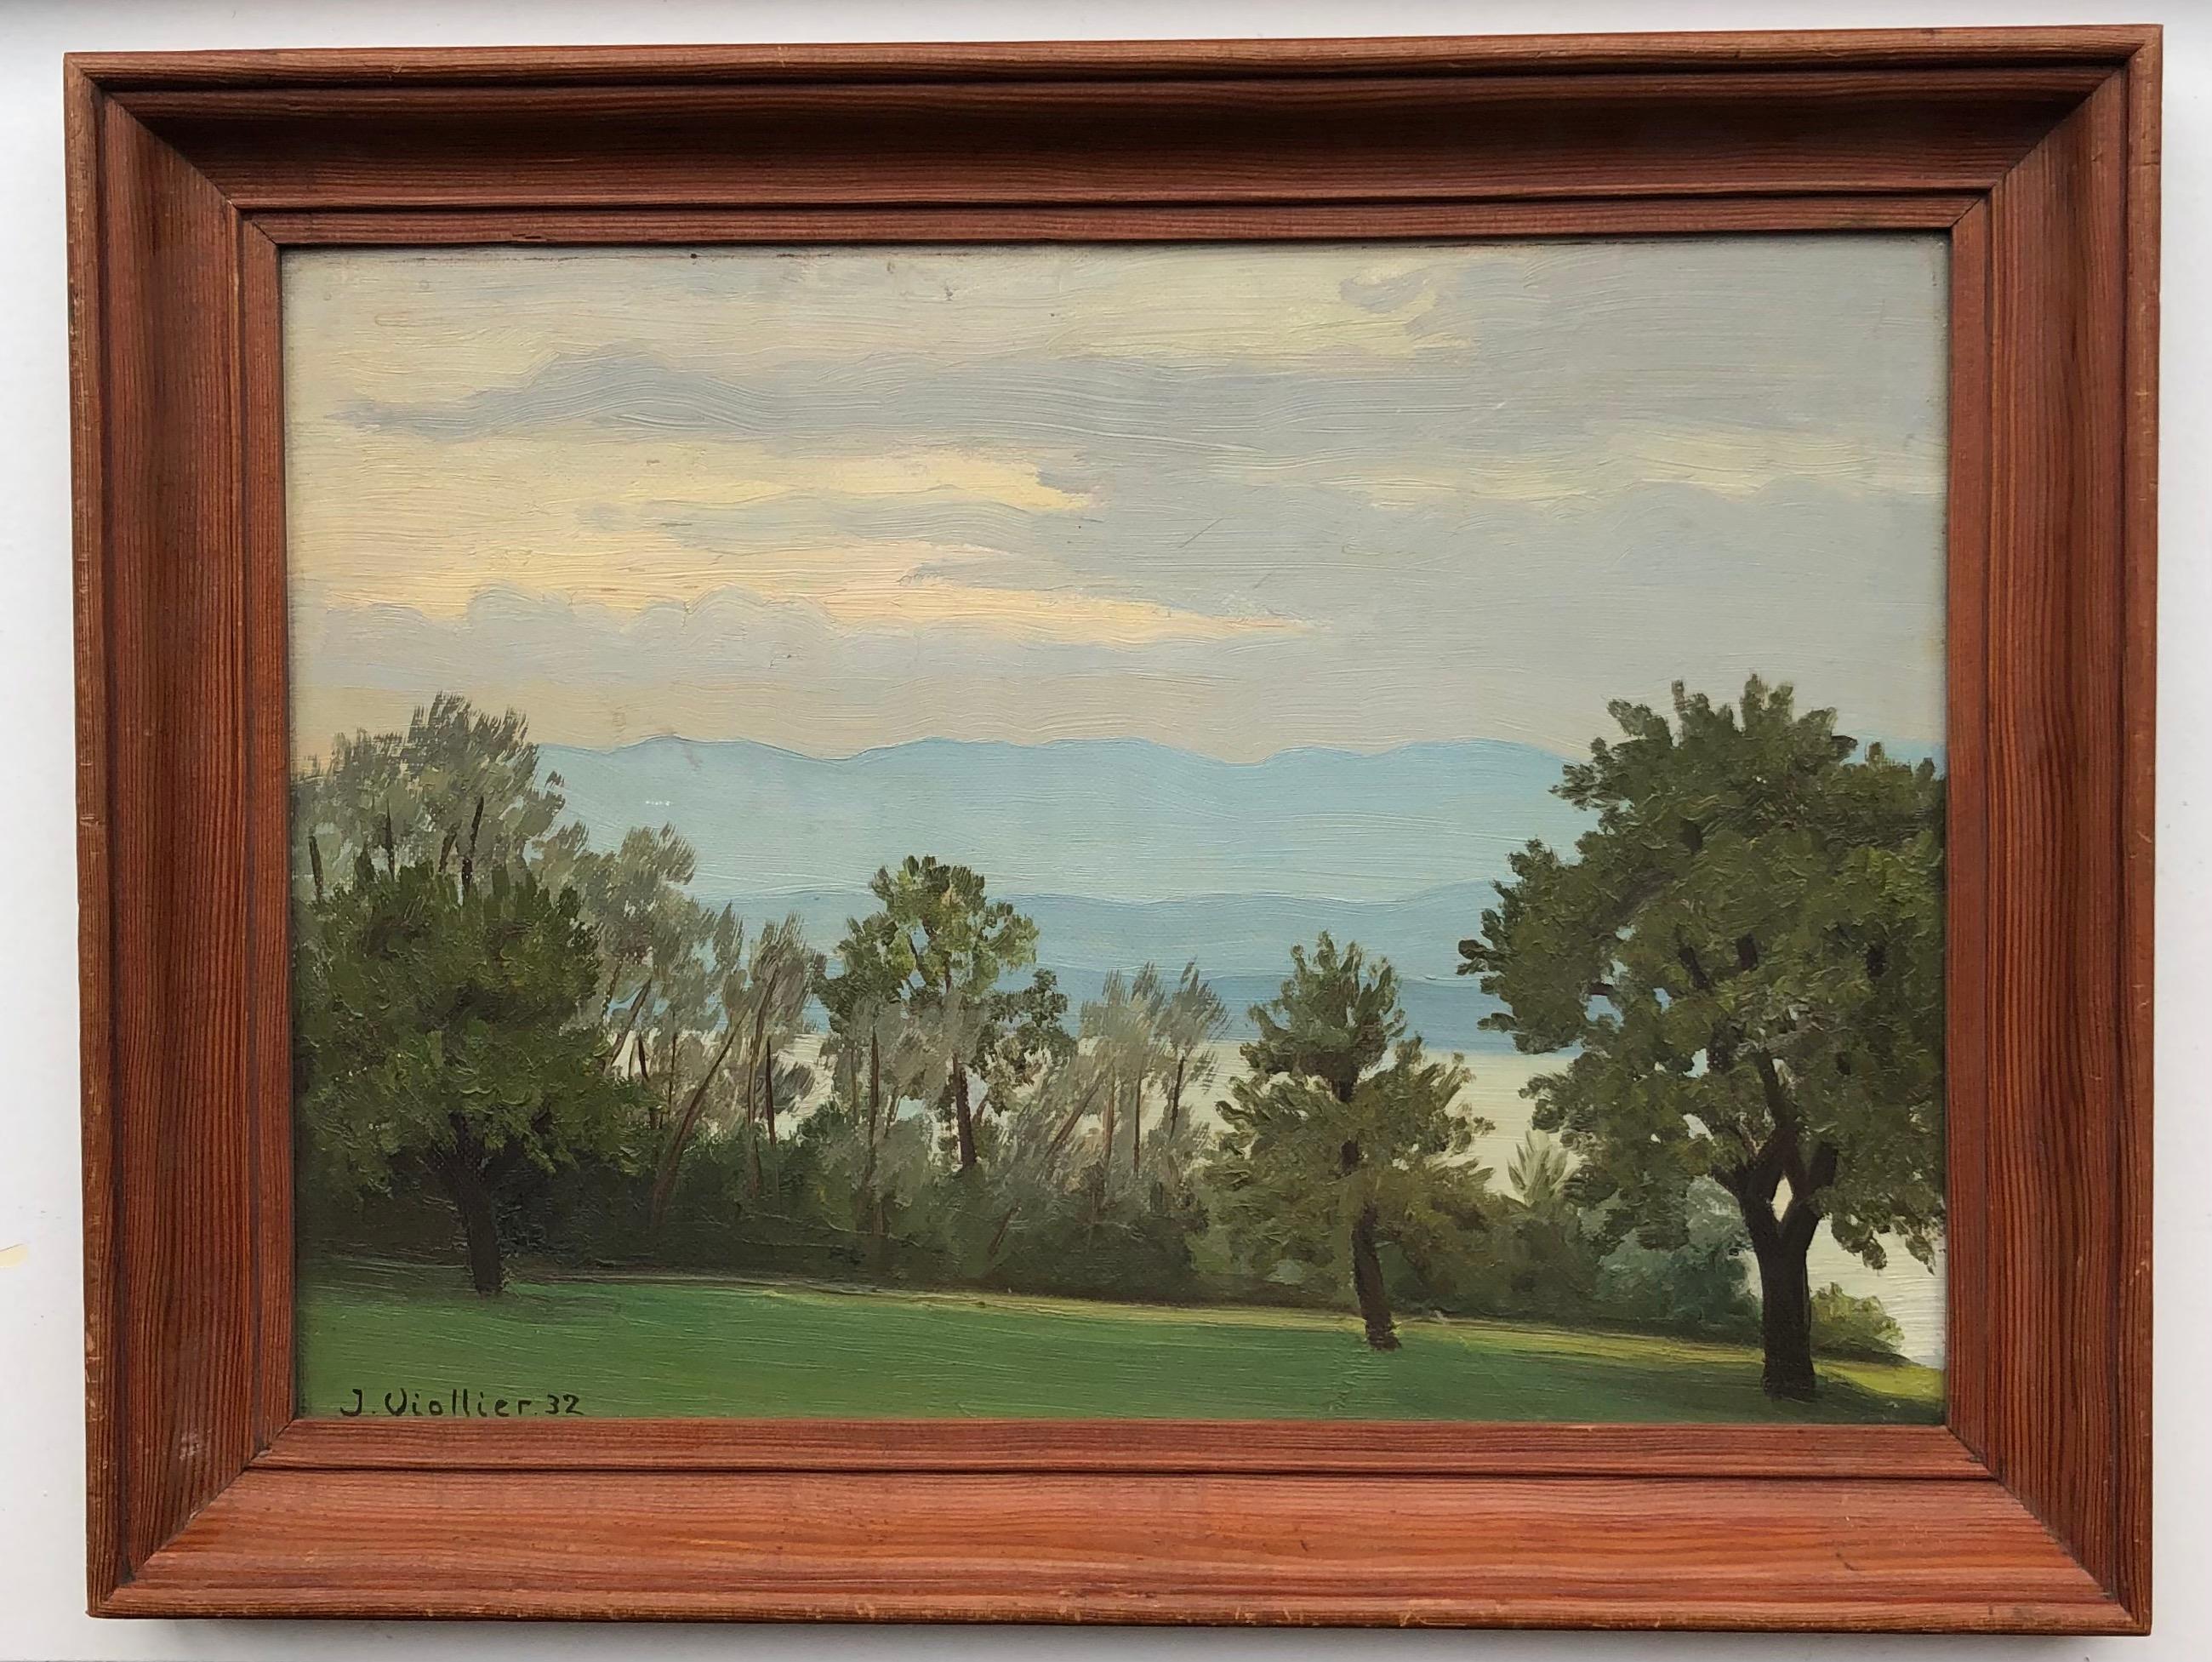 From Cologny with a view of the Jura - Painting by Jean Viollier